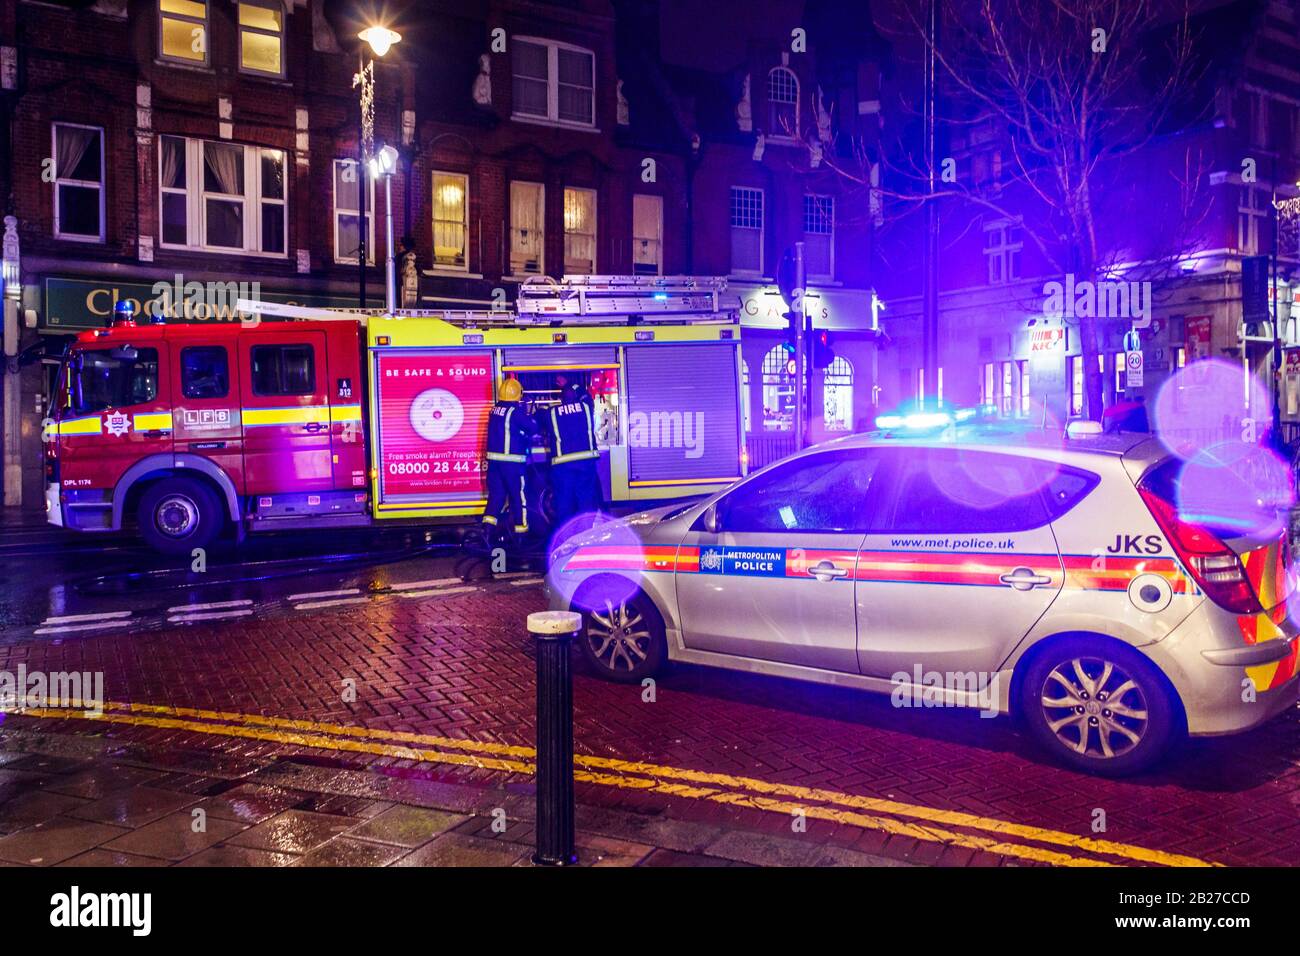 Emergency vehicles attend a fire at night in Crouch End, London, UK Stock Photo